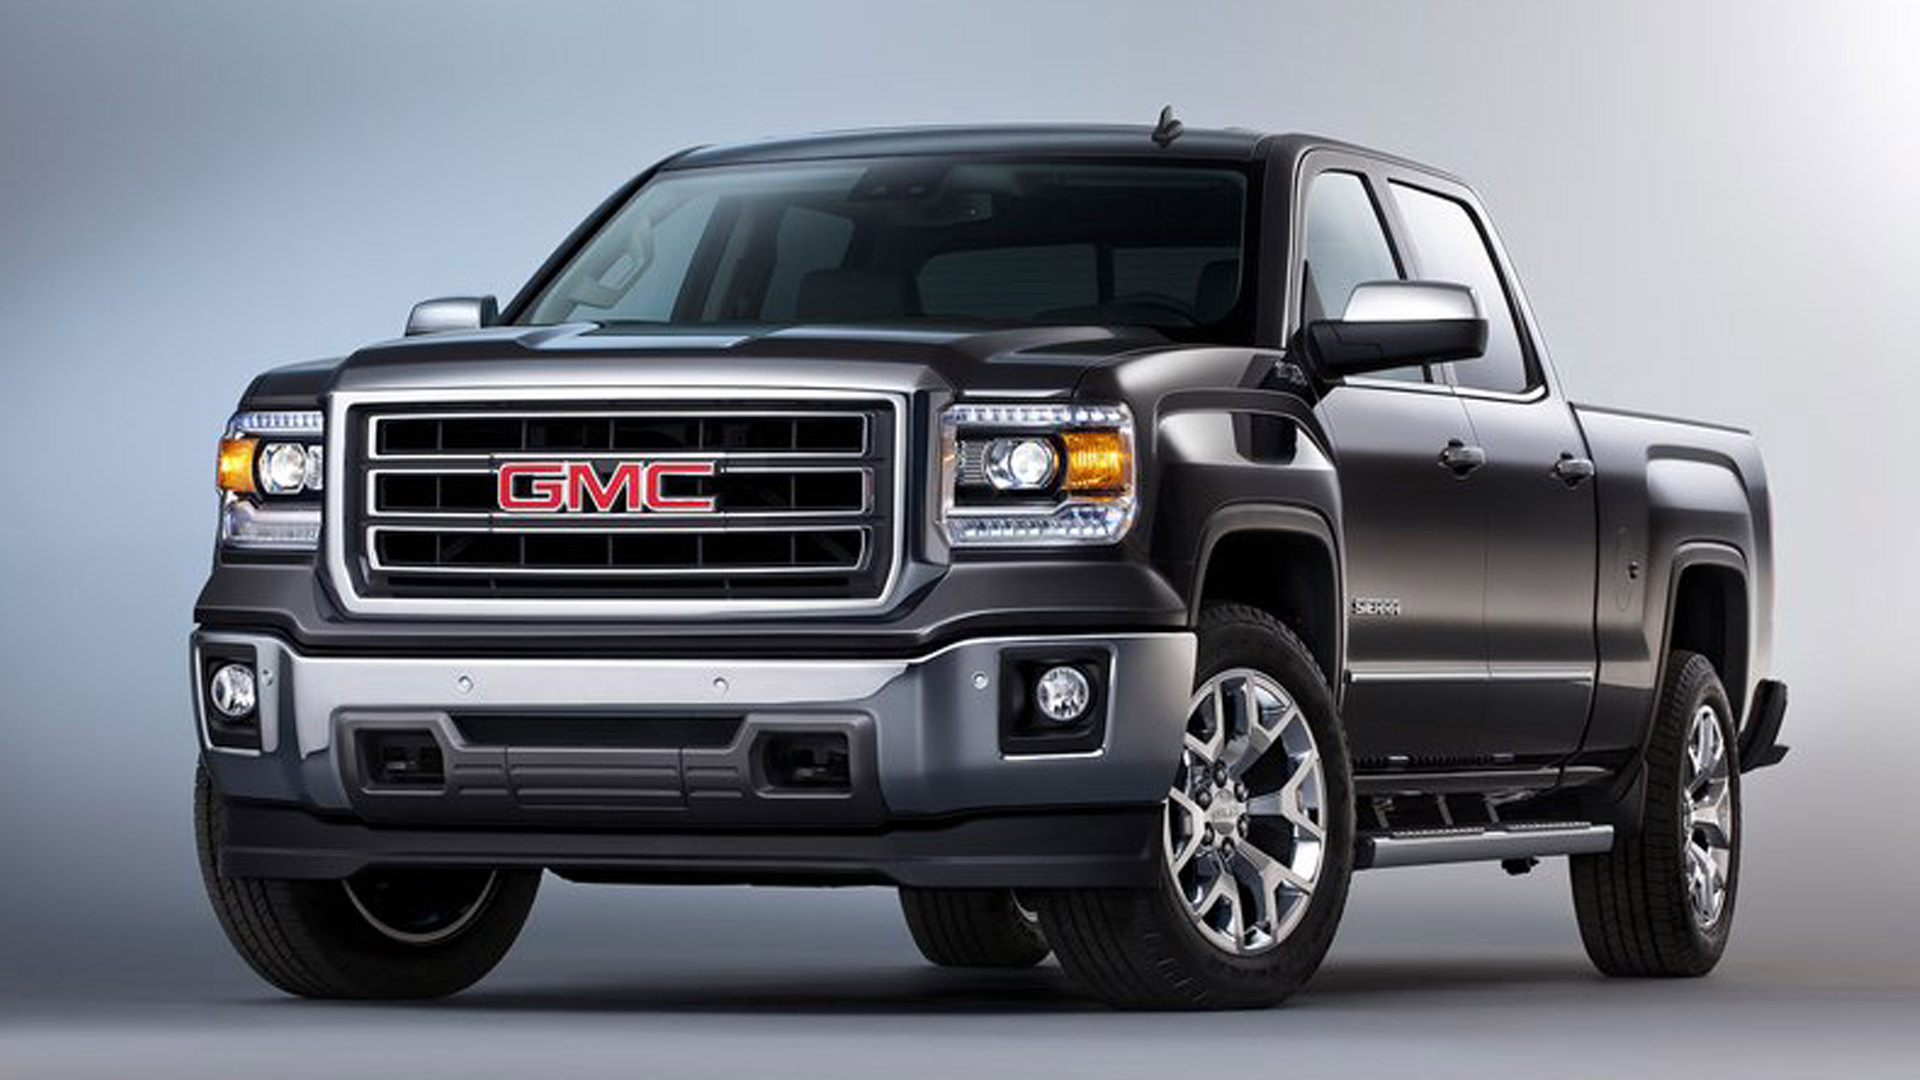 2018 Gmc Pickup Truck  New Car Release Date and Review 2018  Amanda Felicia